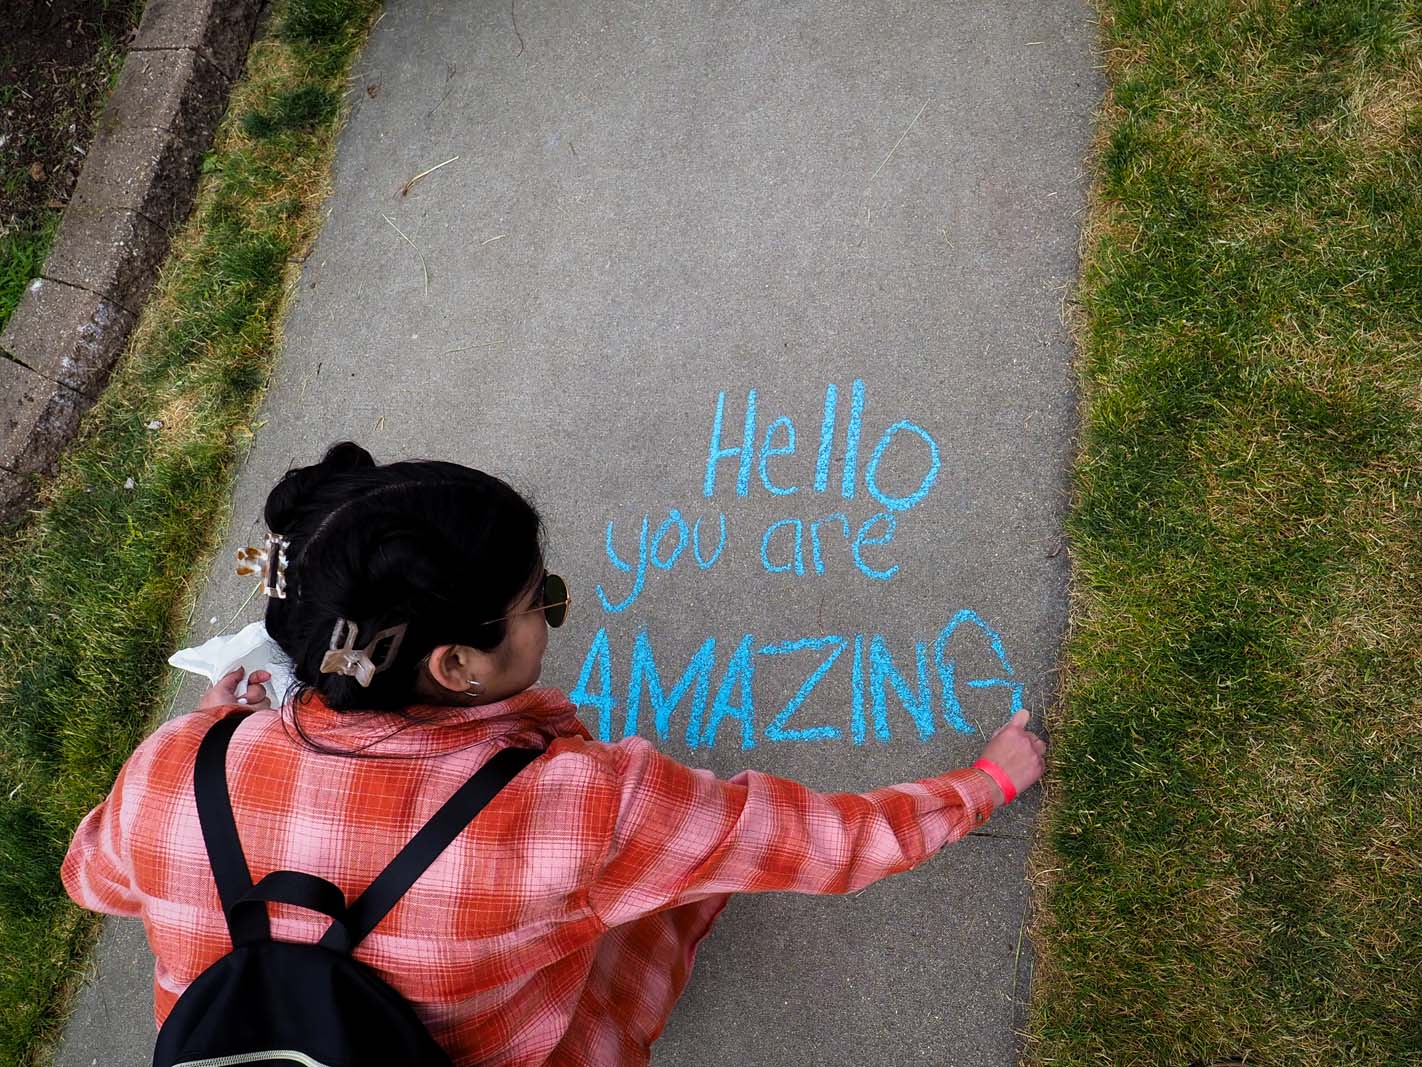 A 2023 GH Pride attendee writing "Hello, you are amazing" with sidewalk chalk.